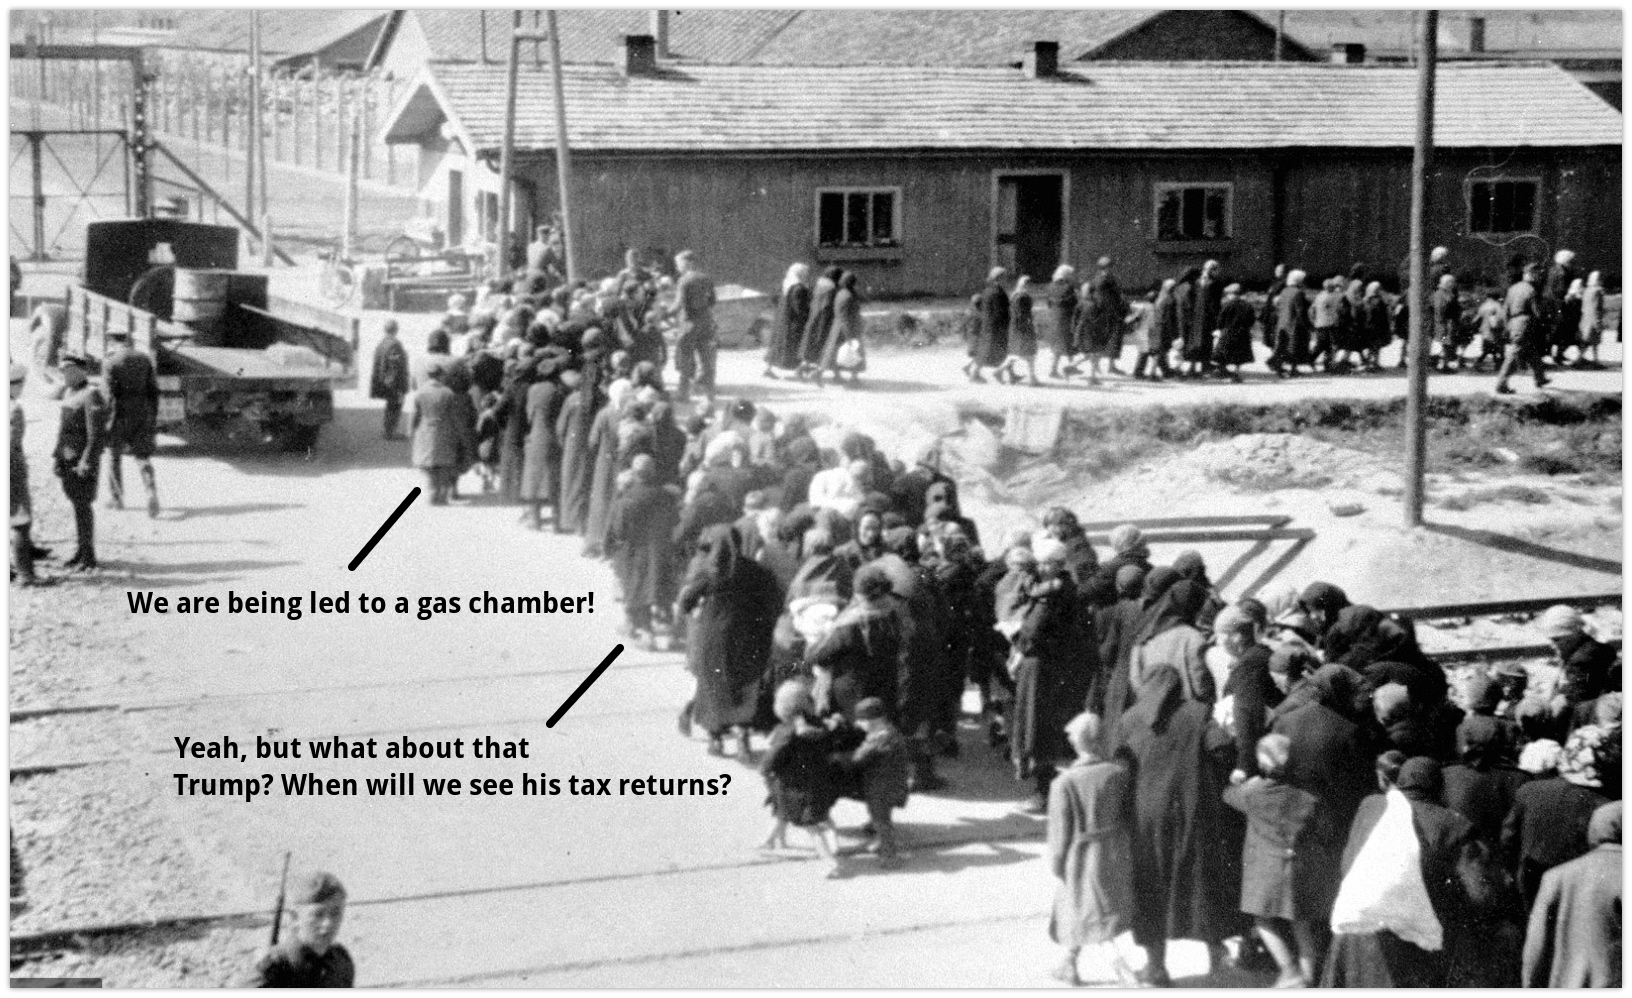 jews being marched into gas chamber - Google Search 2021-04-16 08-41-42(1).jpg